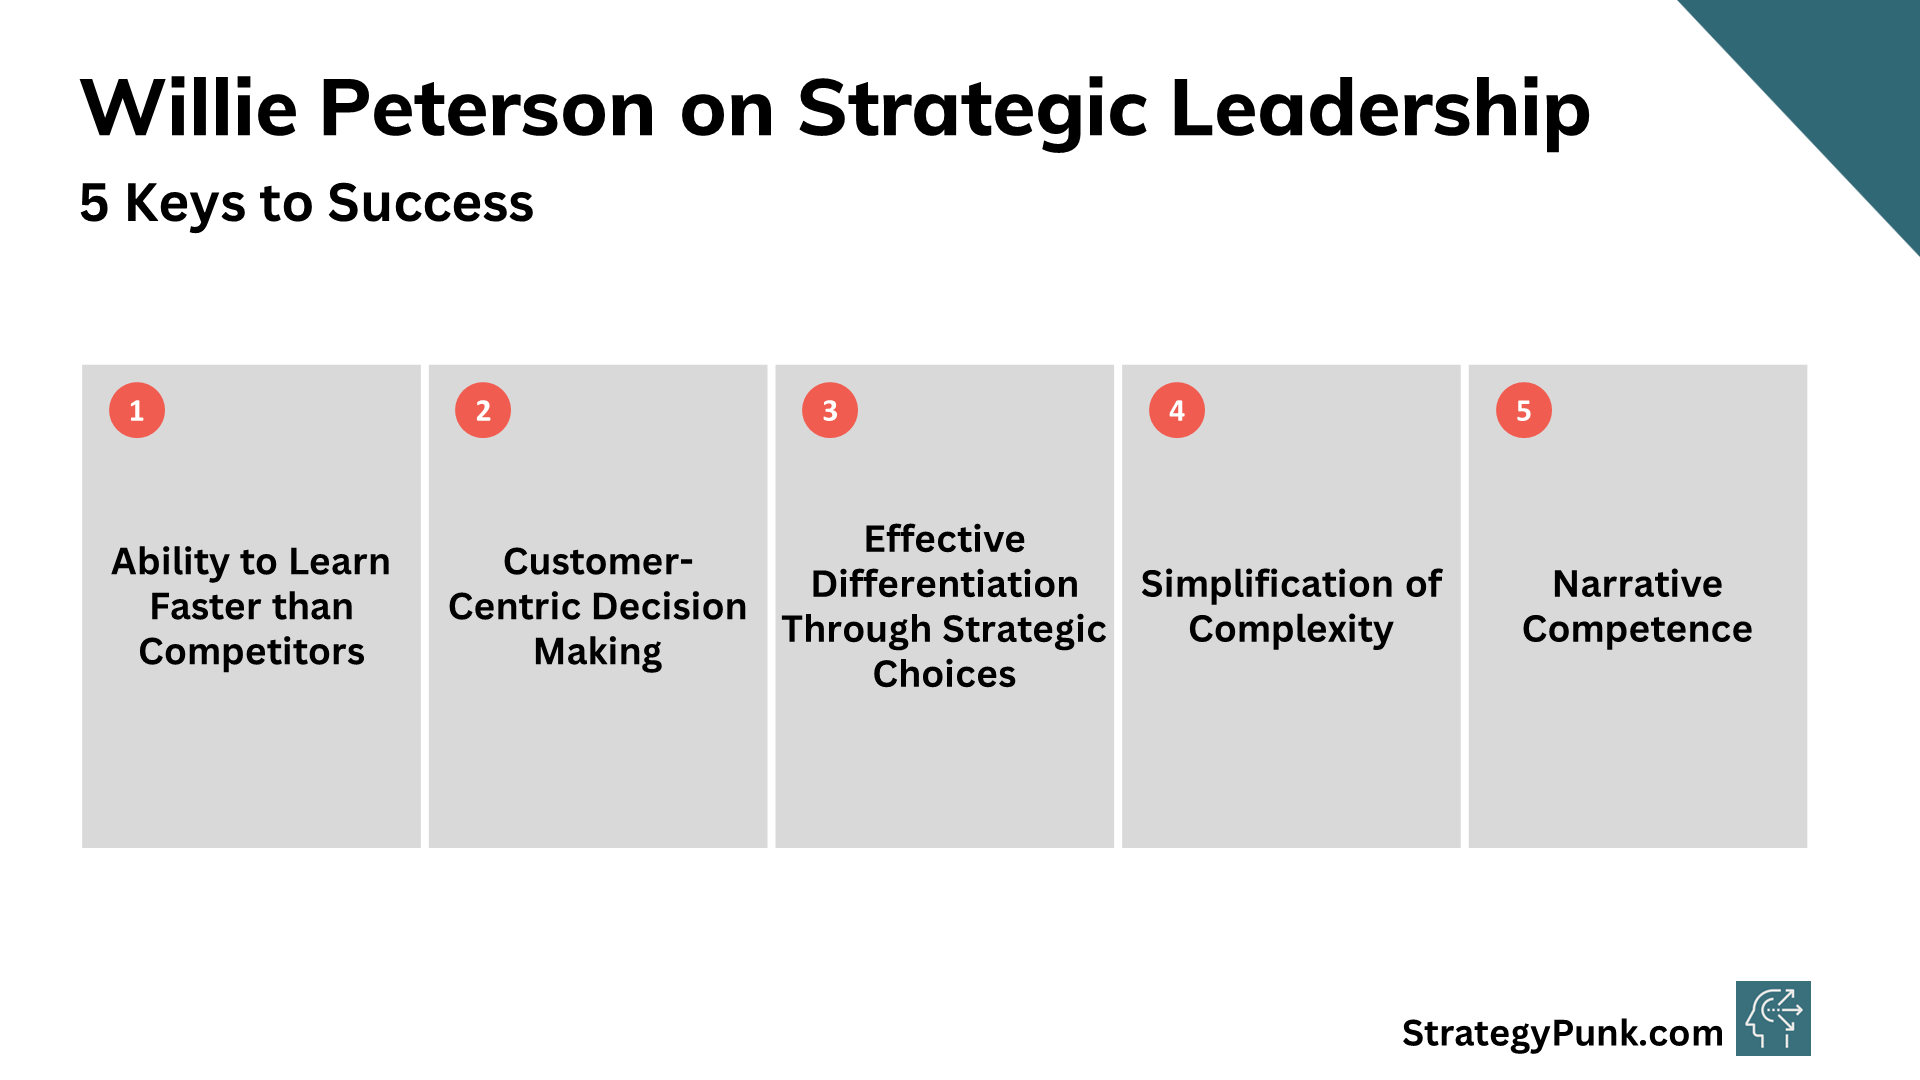 The Art of Strategic Leadership: 5 Keys to Success by Willie Peterson